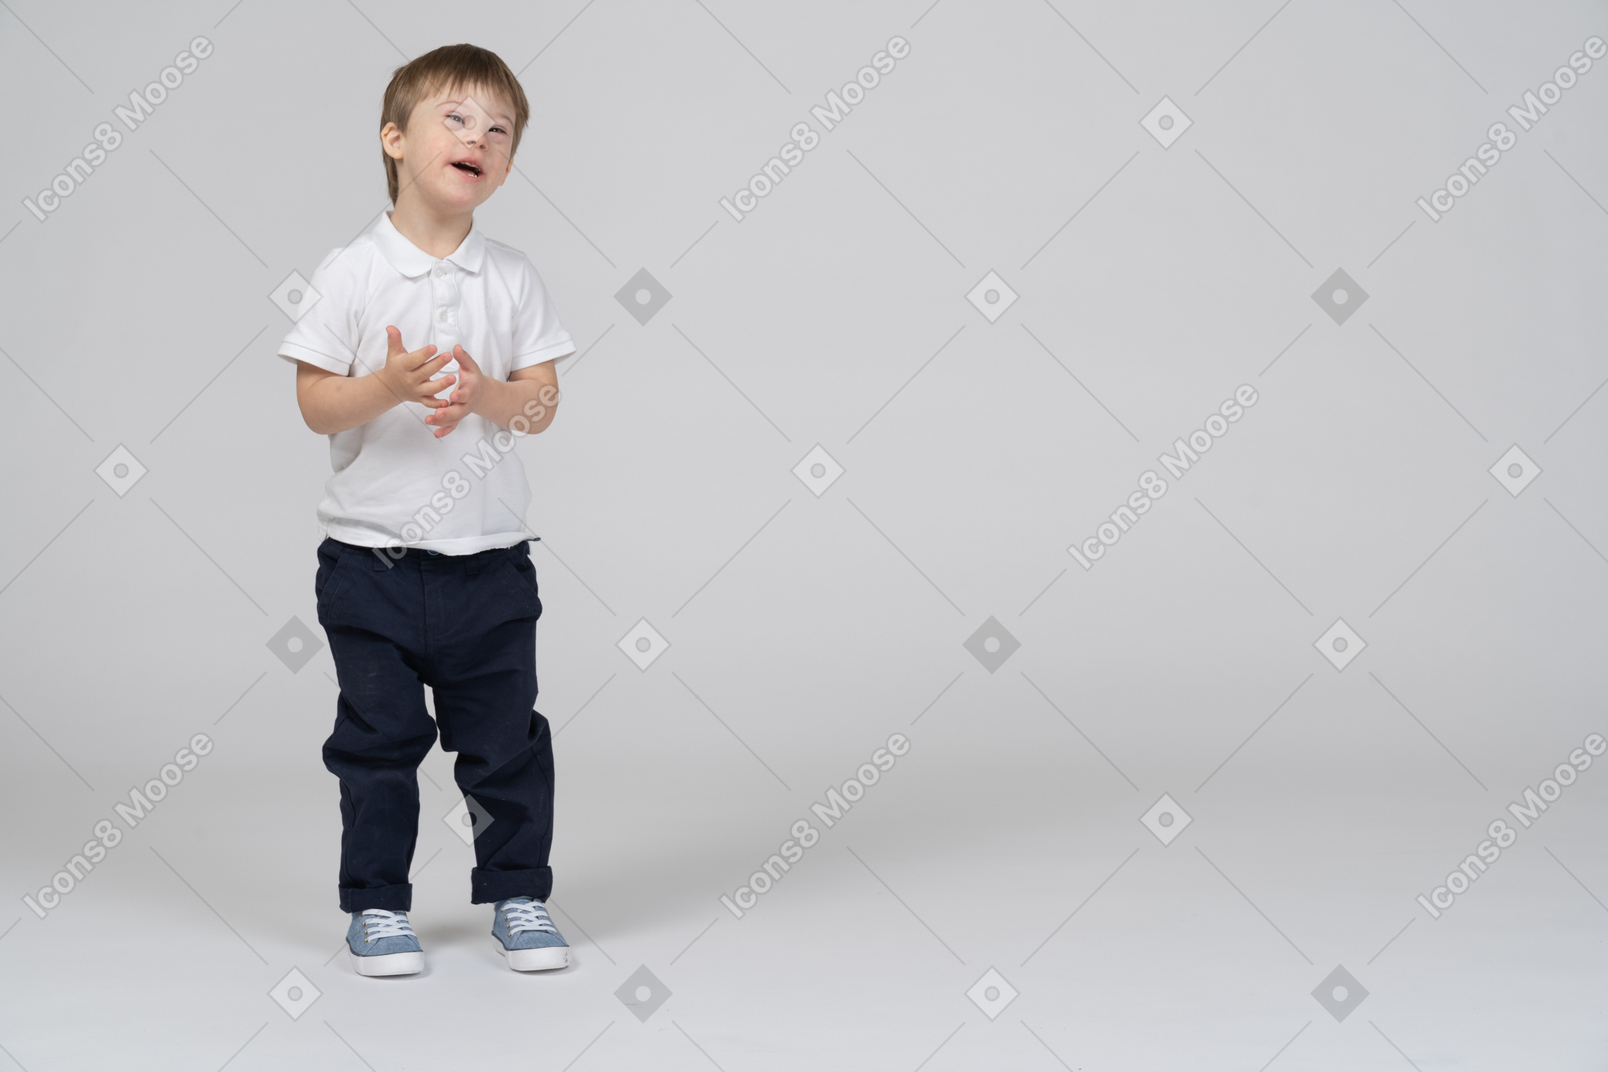 Little boy in casual clothes standing